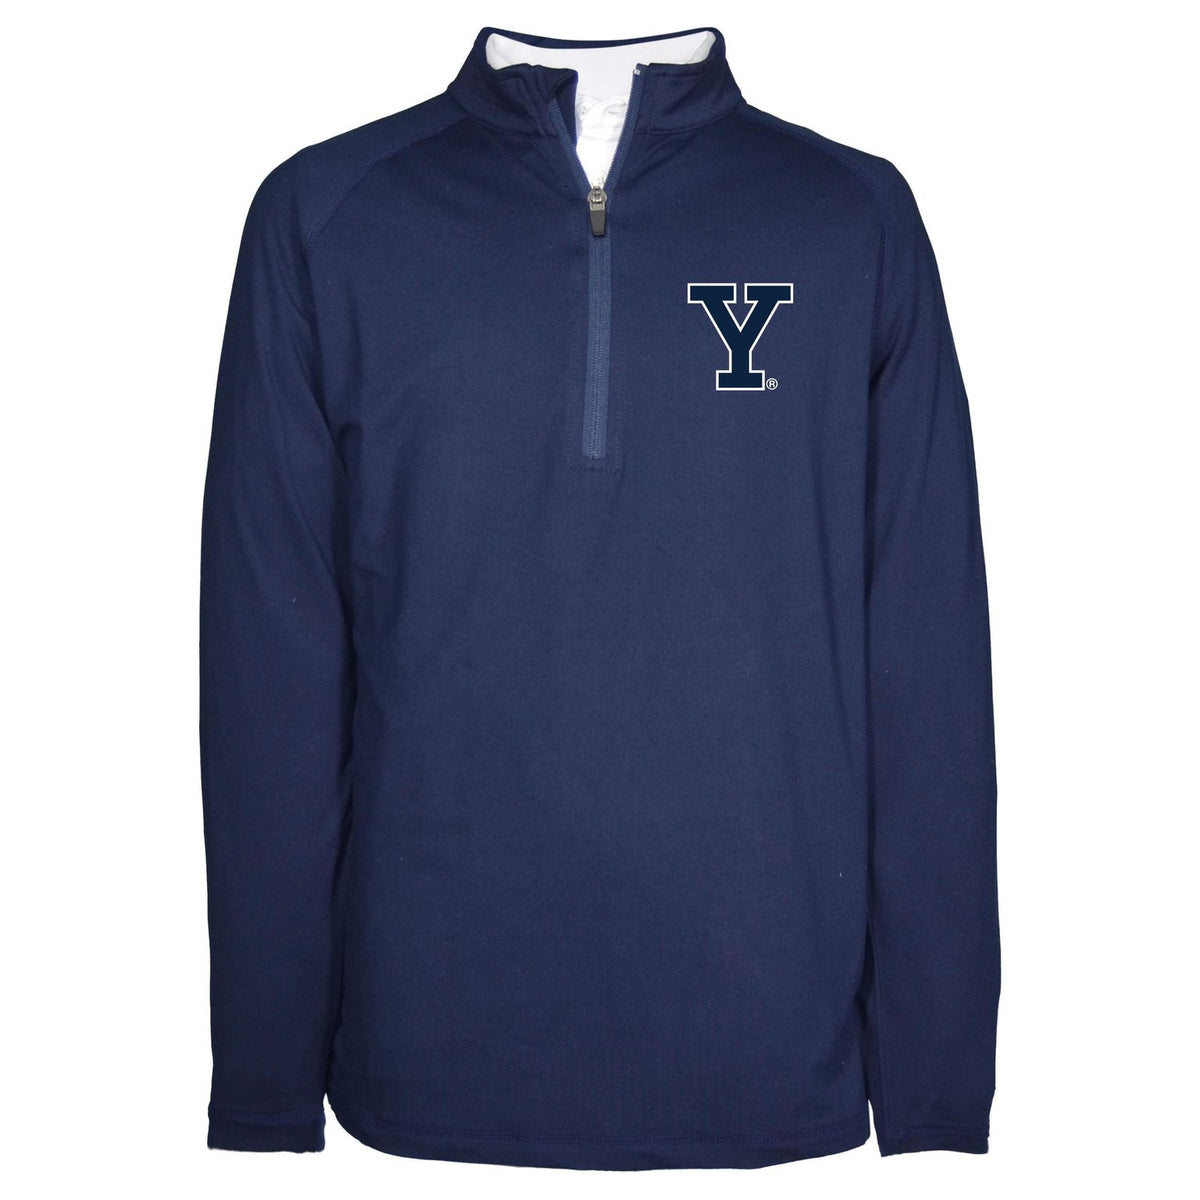 Yale Bulldogs Youth Boys' 1/4-Zip Pullover